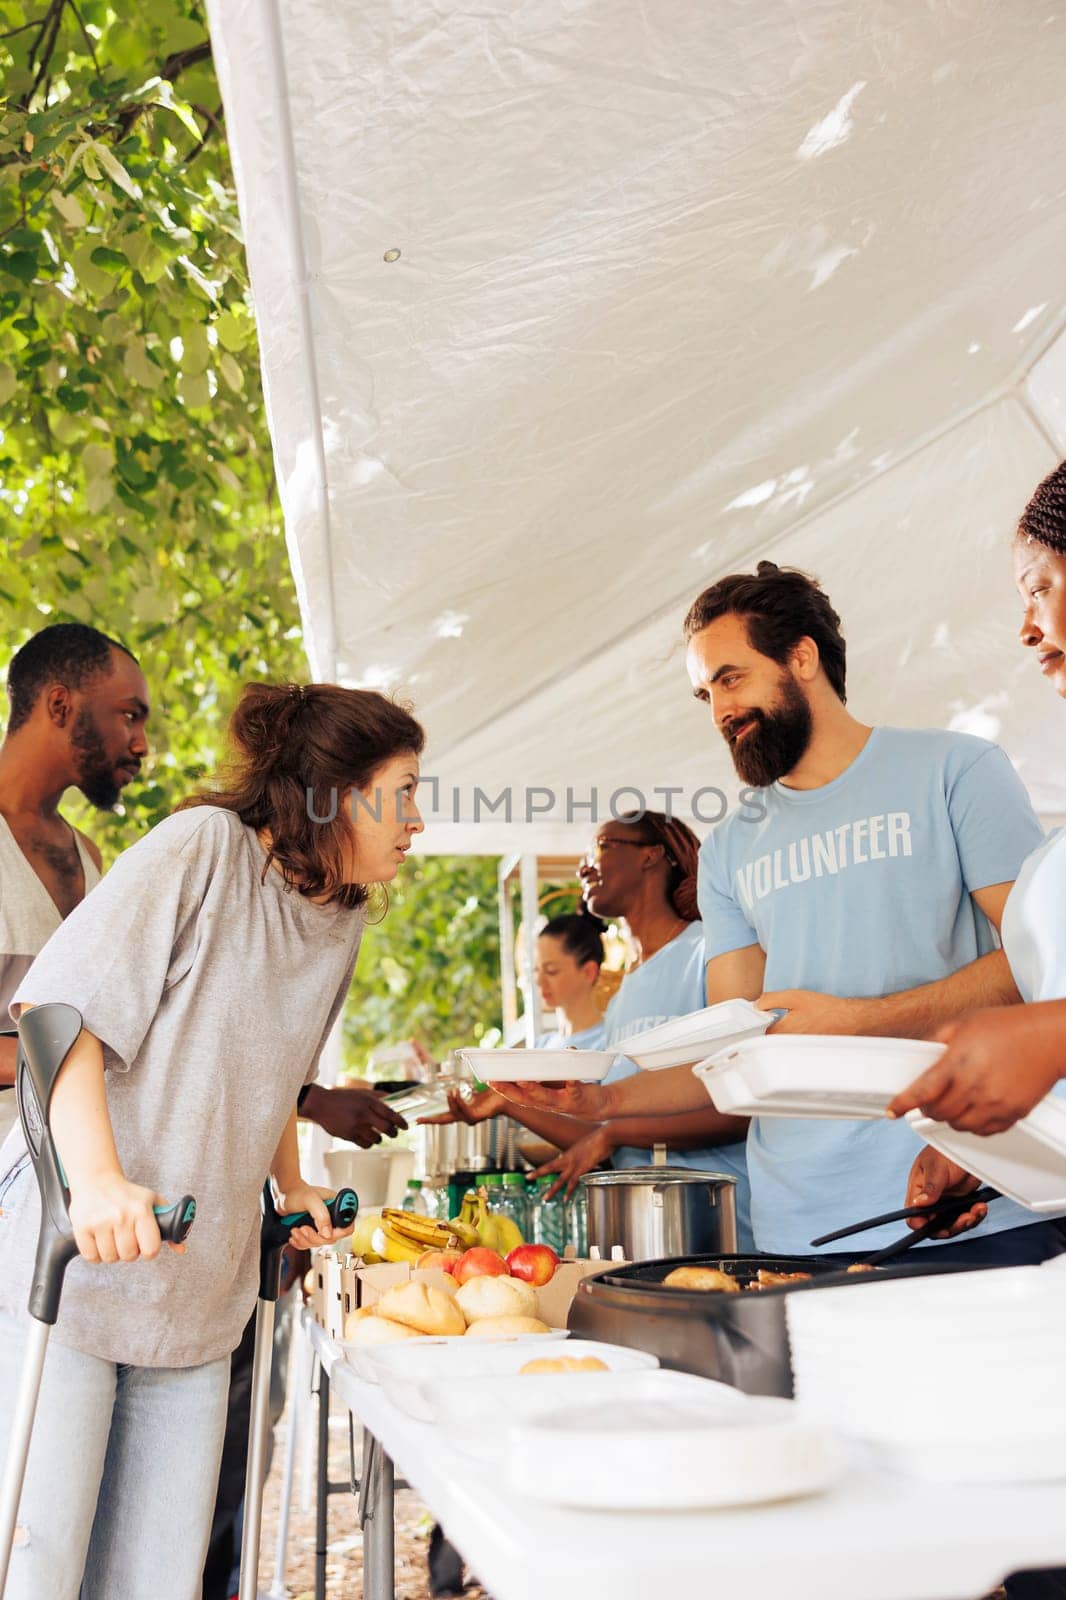 Multiethnic charity group gives back, providing free food, shelter, and support to the less fortunate. Smiling and happy volunteers helping the homeless, sick, and disadvantaged individuals in need.